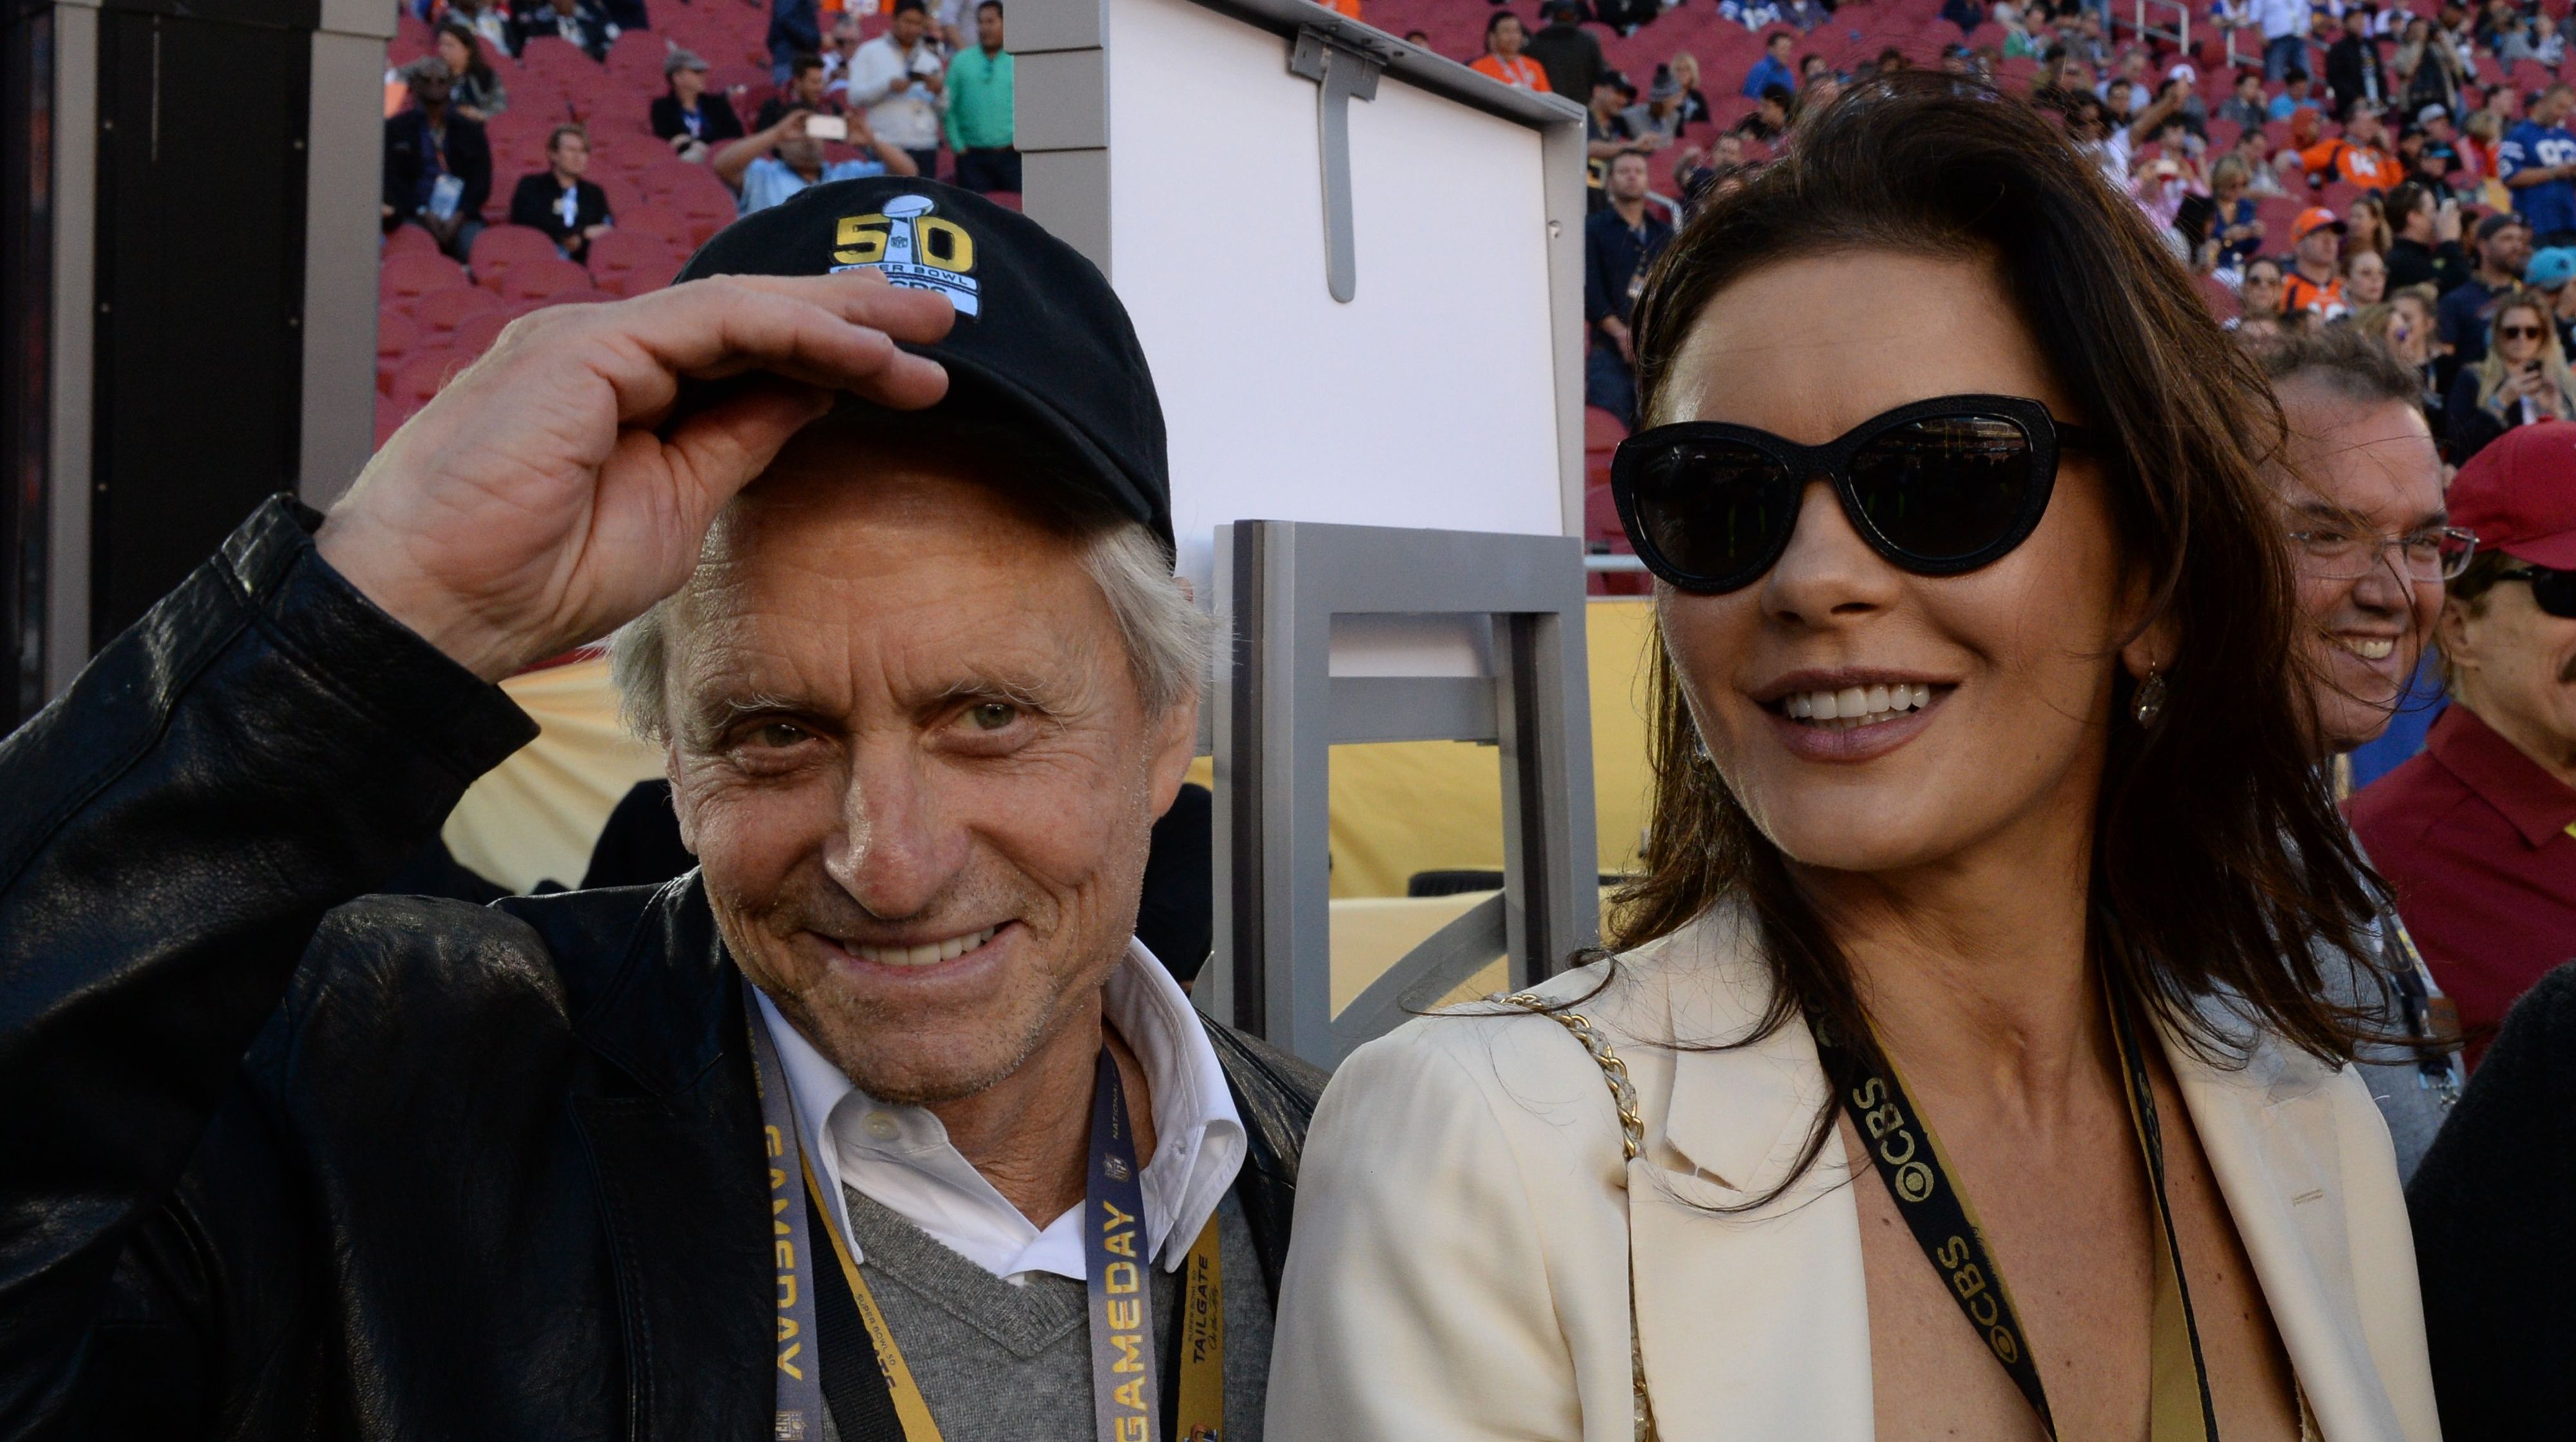 Michael Douglas and Catherine Zeta-Jones arrive at Levi Stadium for Super Bowl 50 between the Carolina Panthers and the Denver Broncos ,in Santa Clara, California, February 7, 2016. | Source: Getty Images